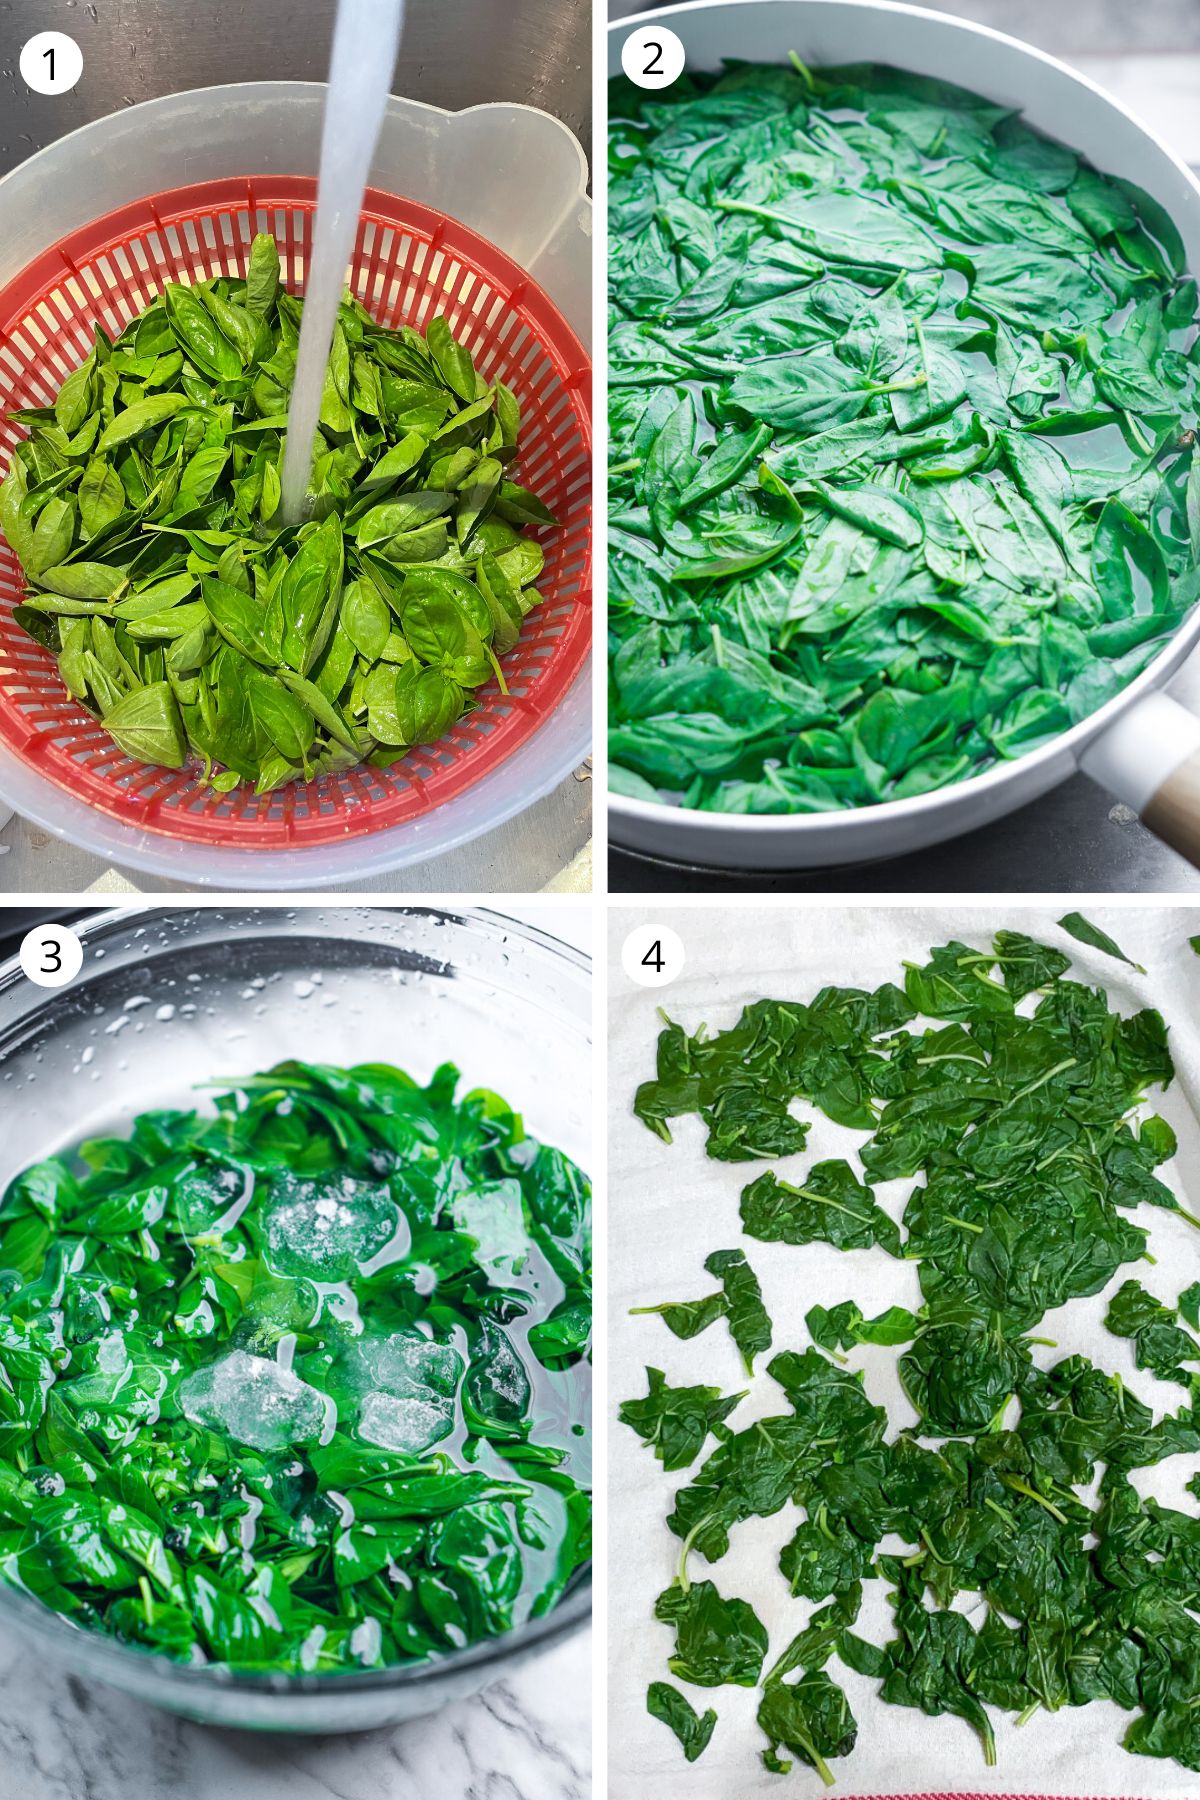 Step by step process of blanching basil for pesto